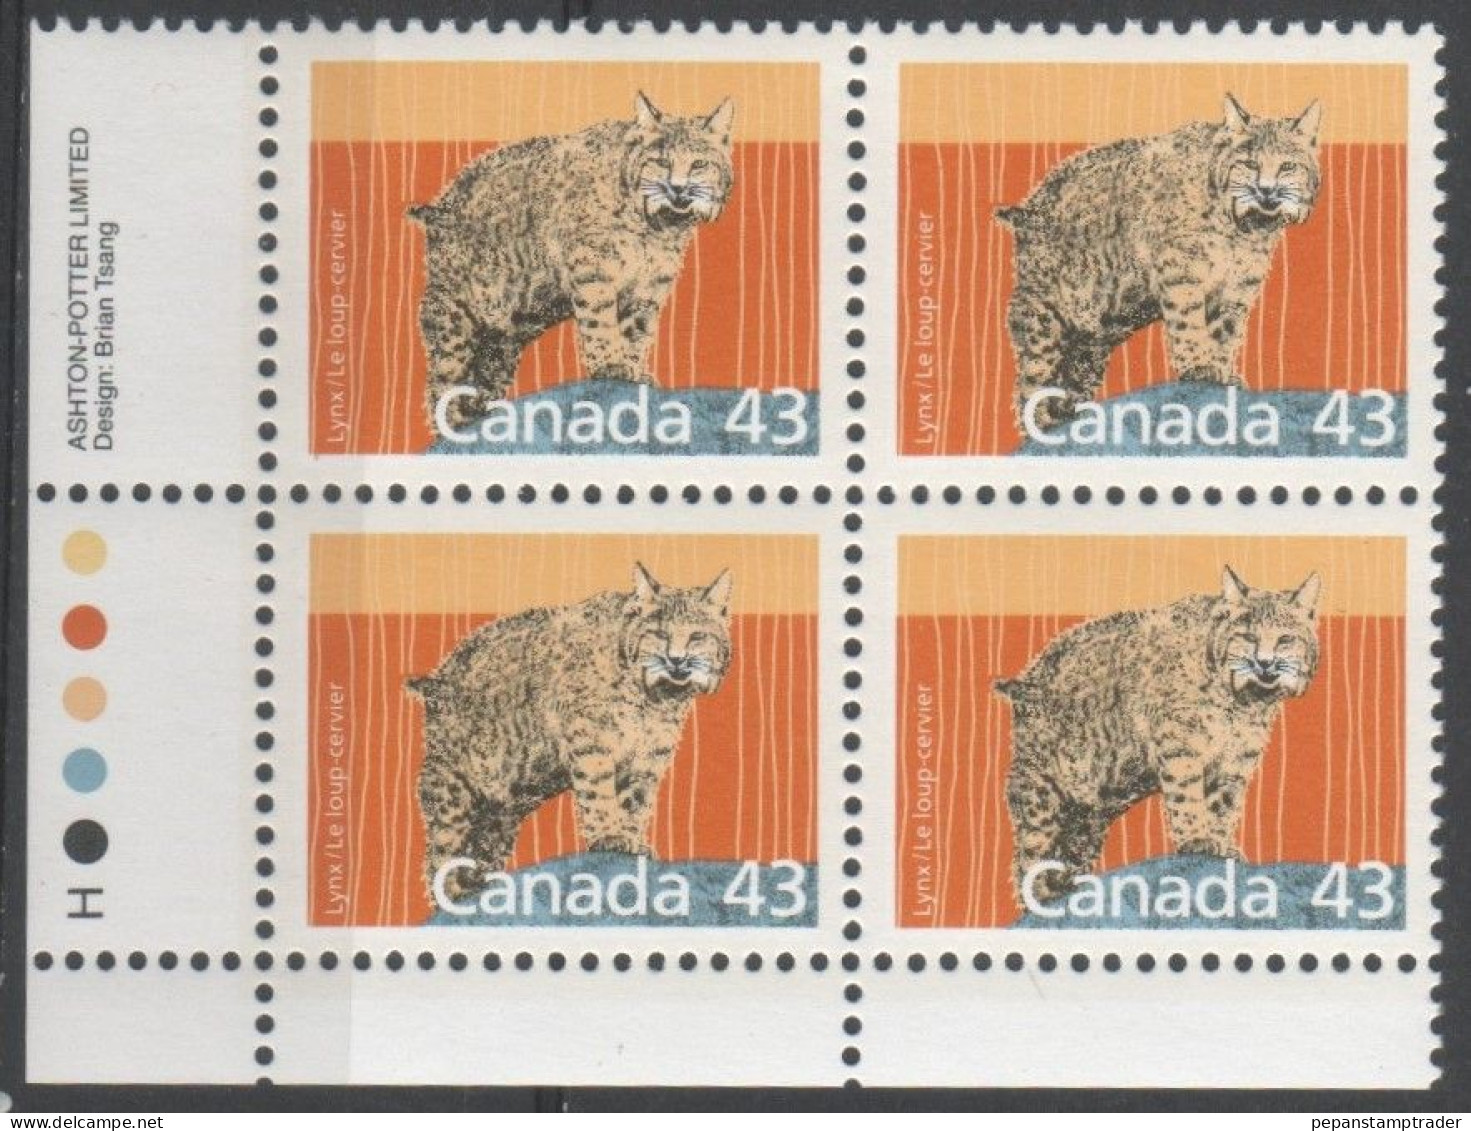 Canada - #1170 - MNH PB Of 4 - Plate Number & Inscriptions